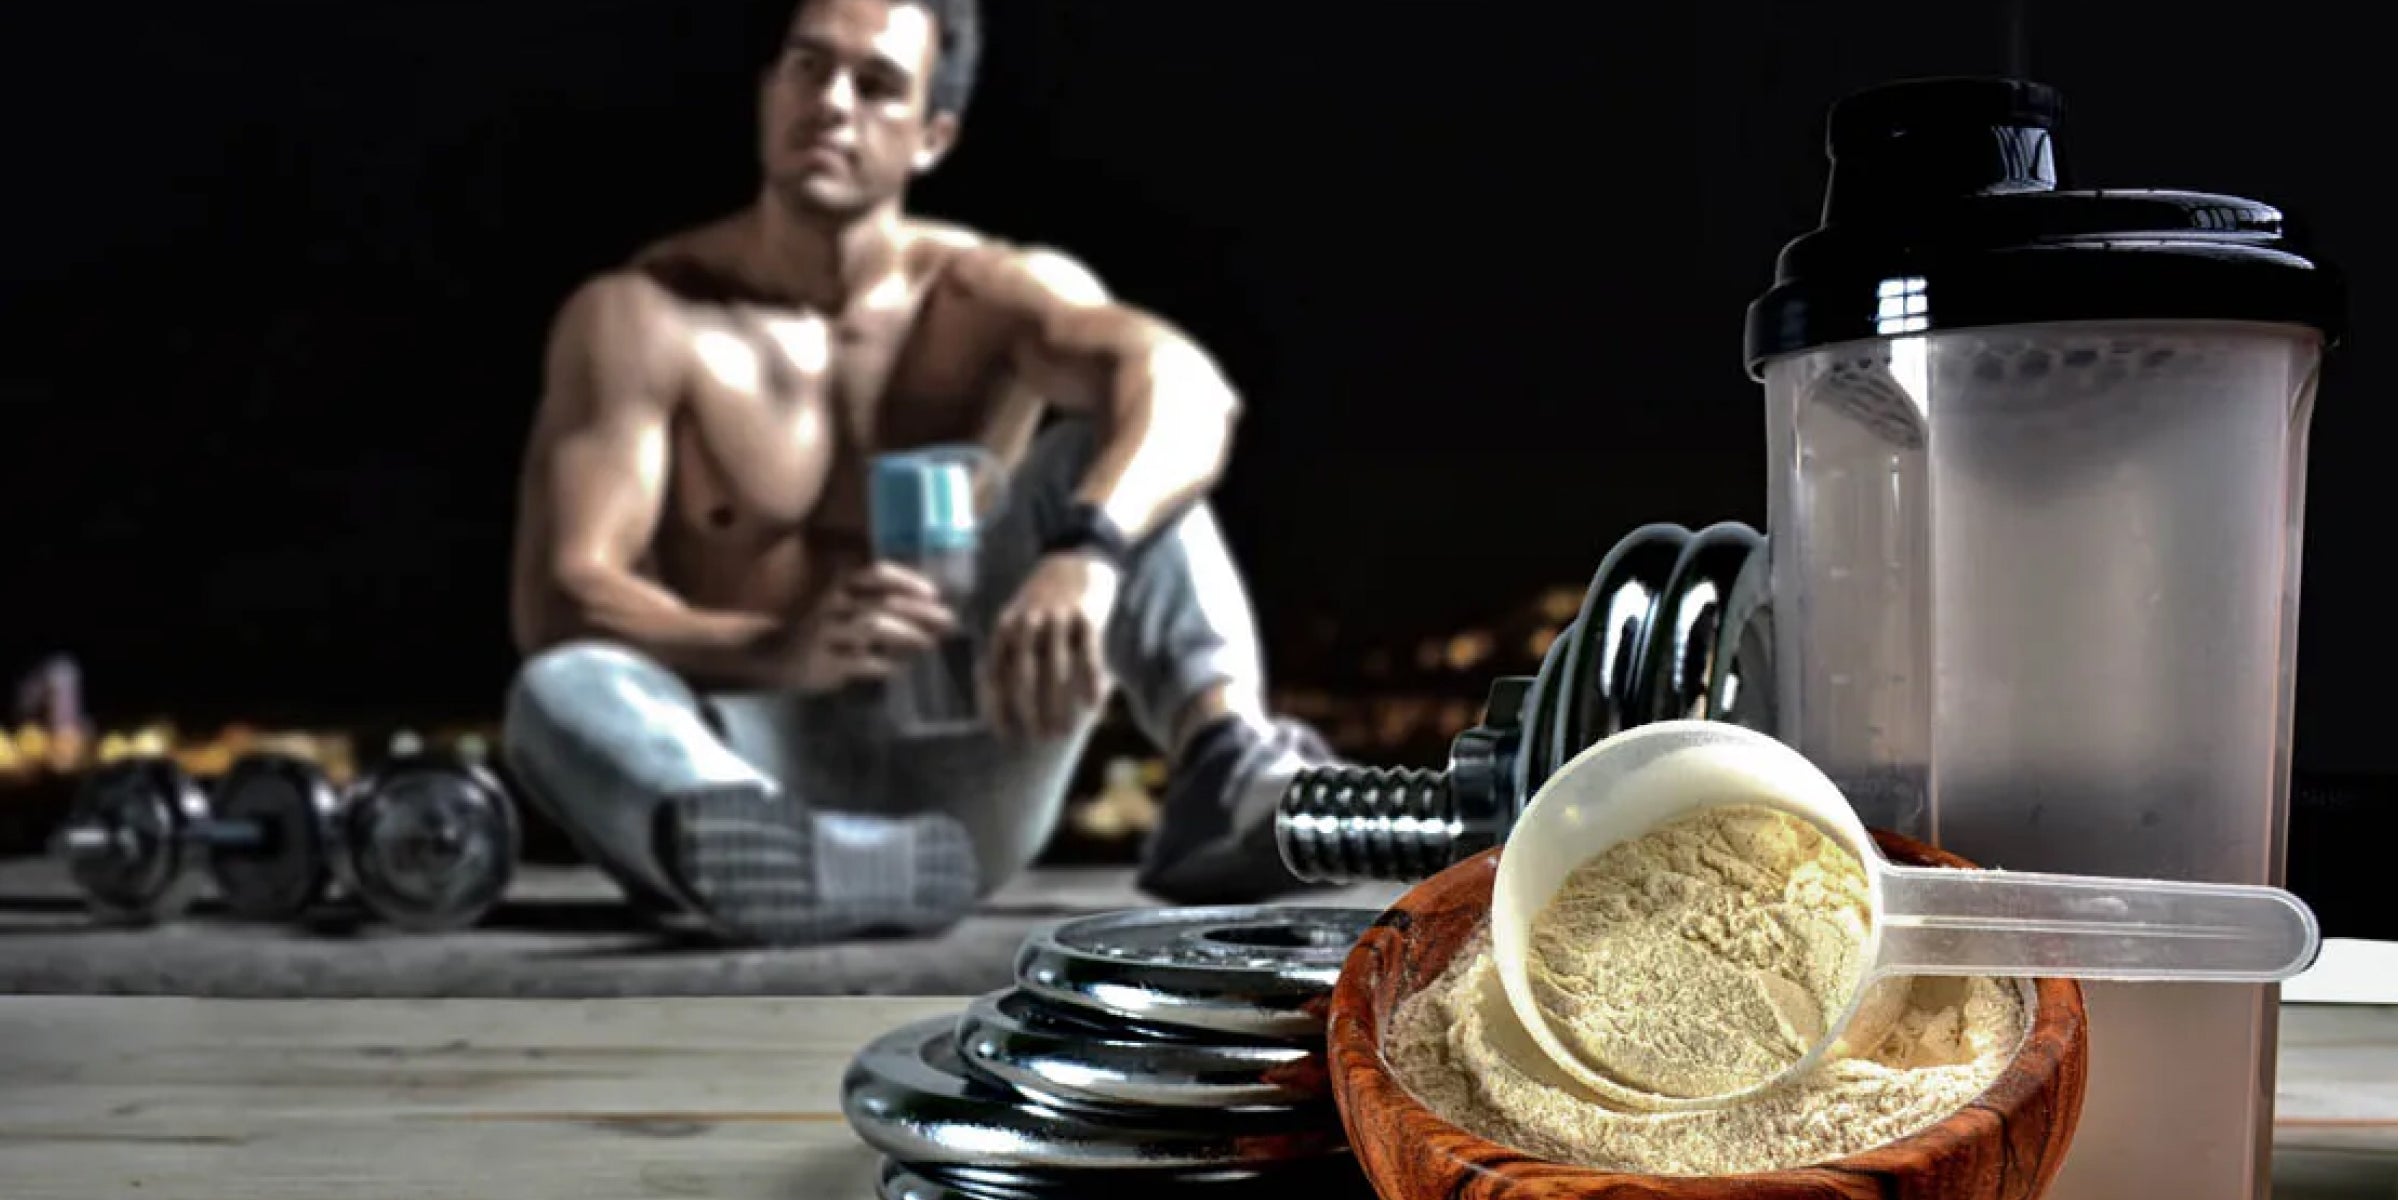 Top 10 best recovery supplements for athletes - Explosive Whey